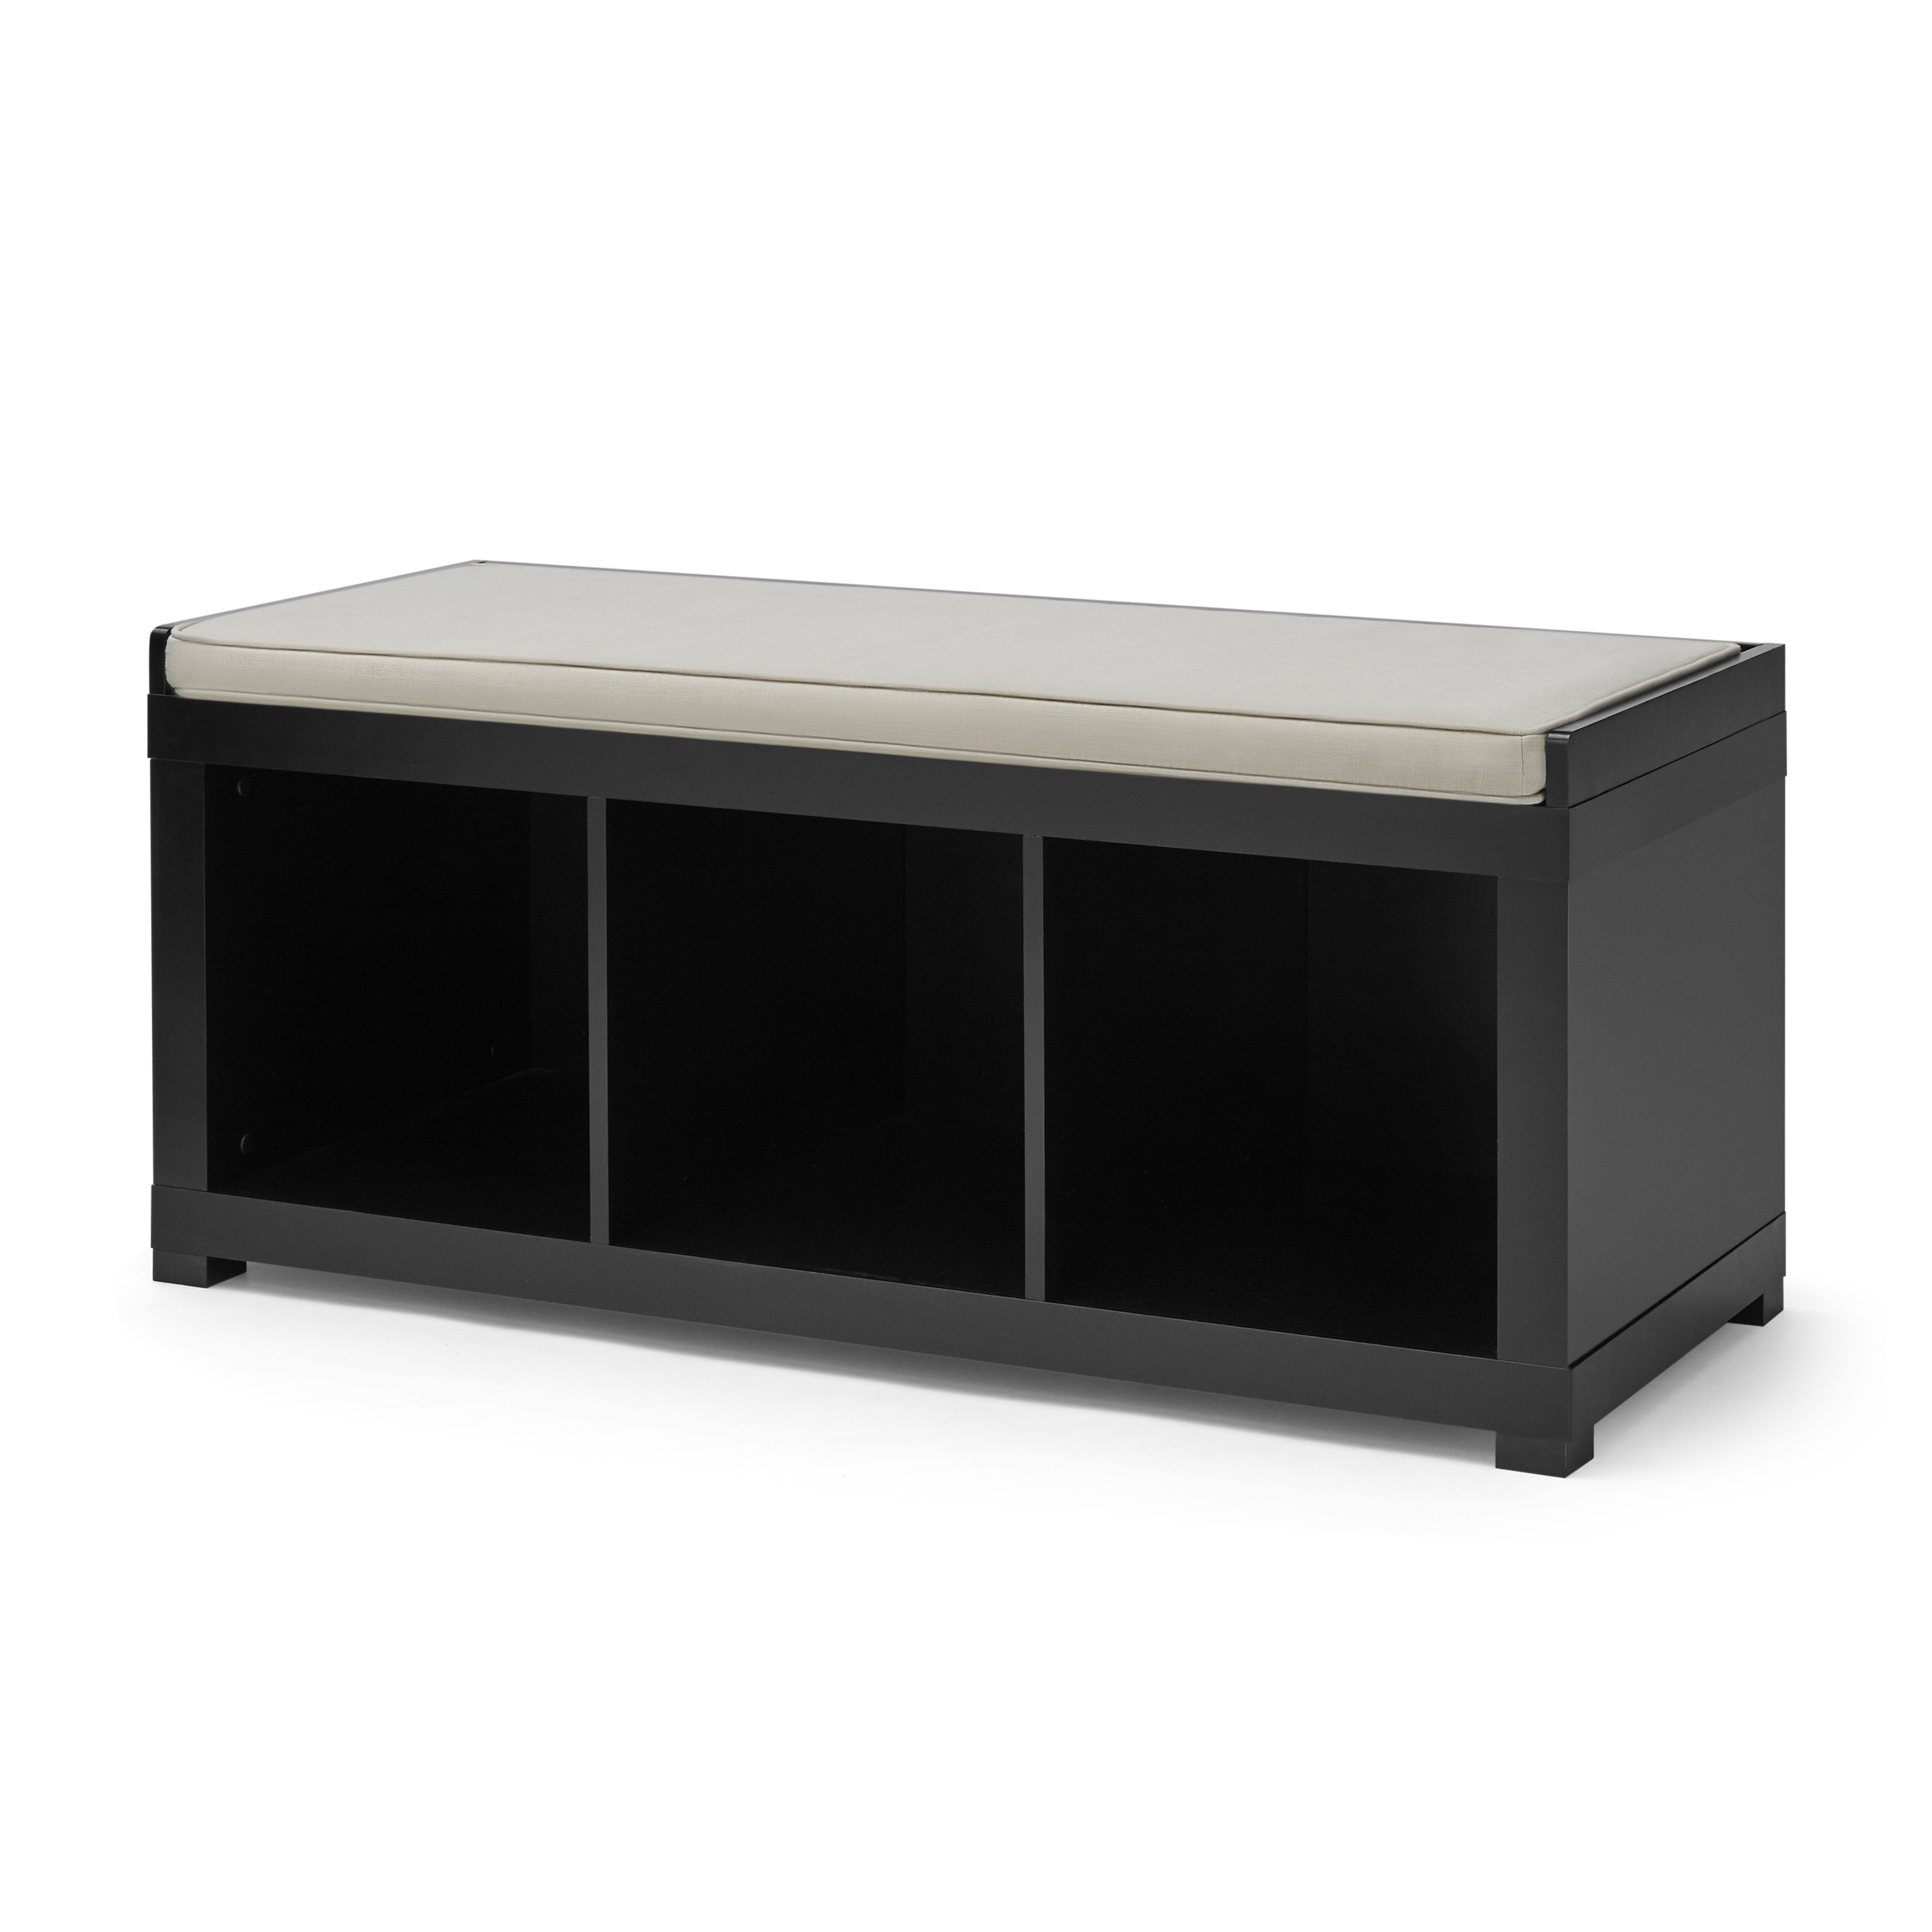 Better Homes & Gardens 3-Cube Shoe Storage Bench, Black - image 5 of 9